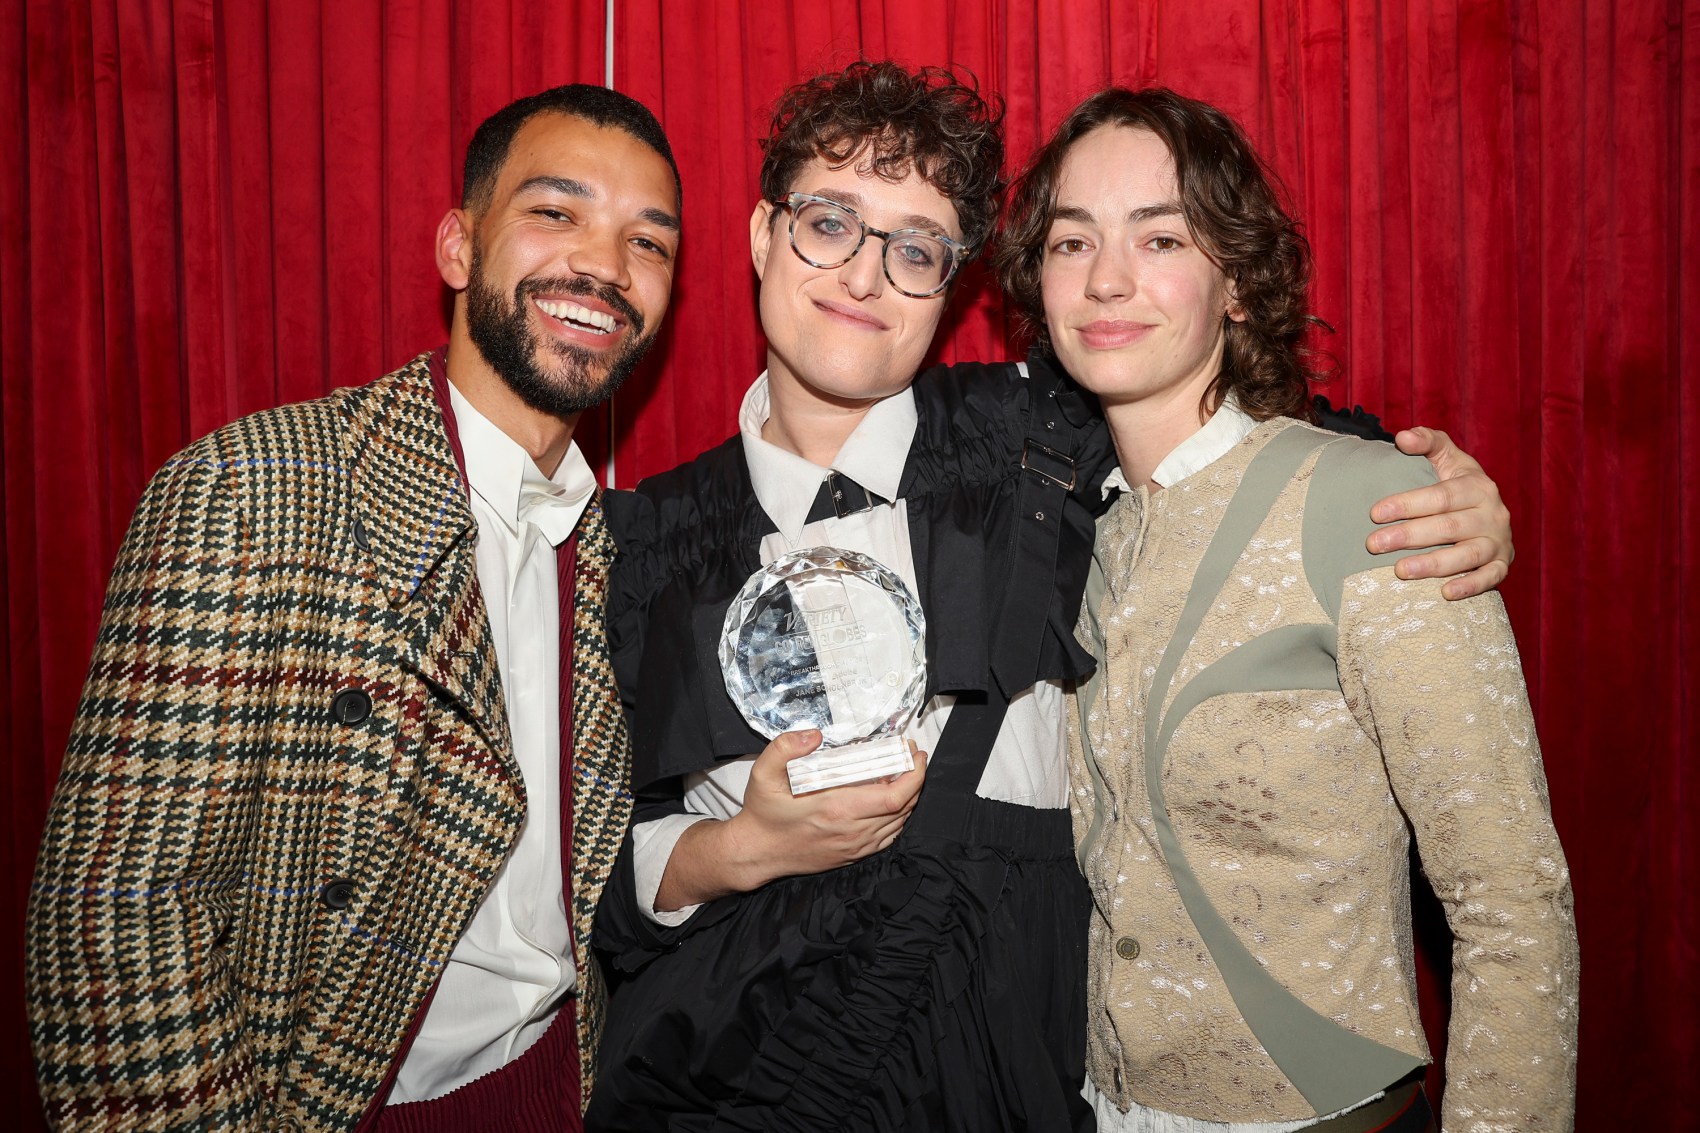 Justice Smith, Jane Schoenbrun and Brigette Lundy-Paine